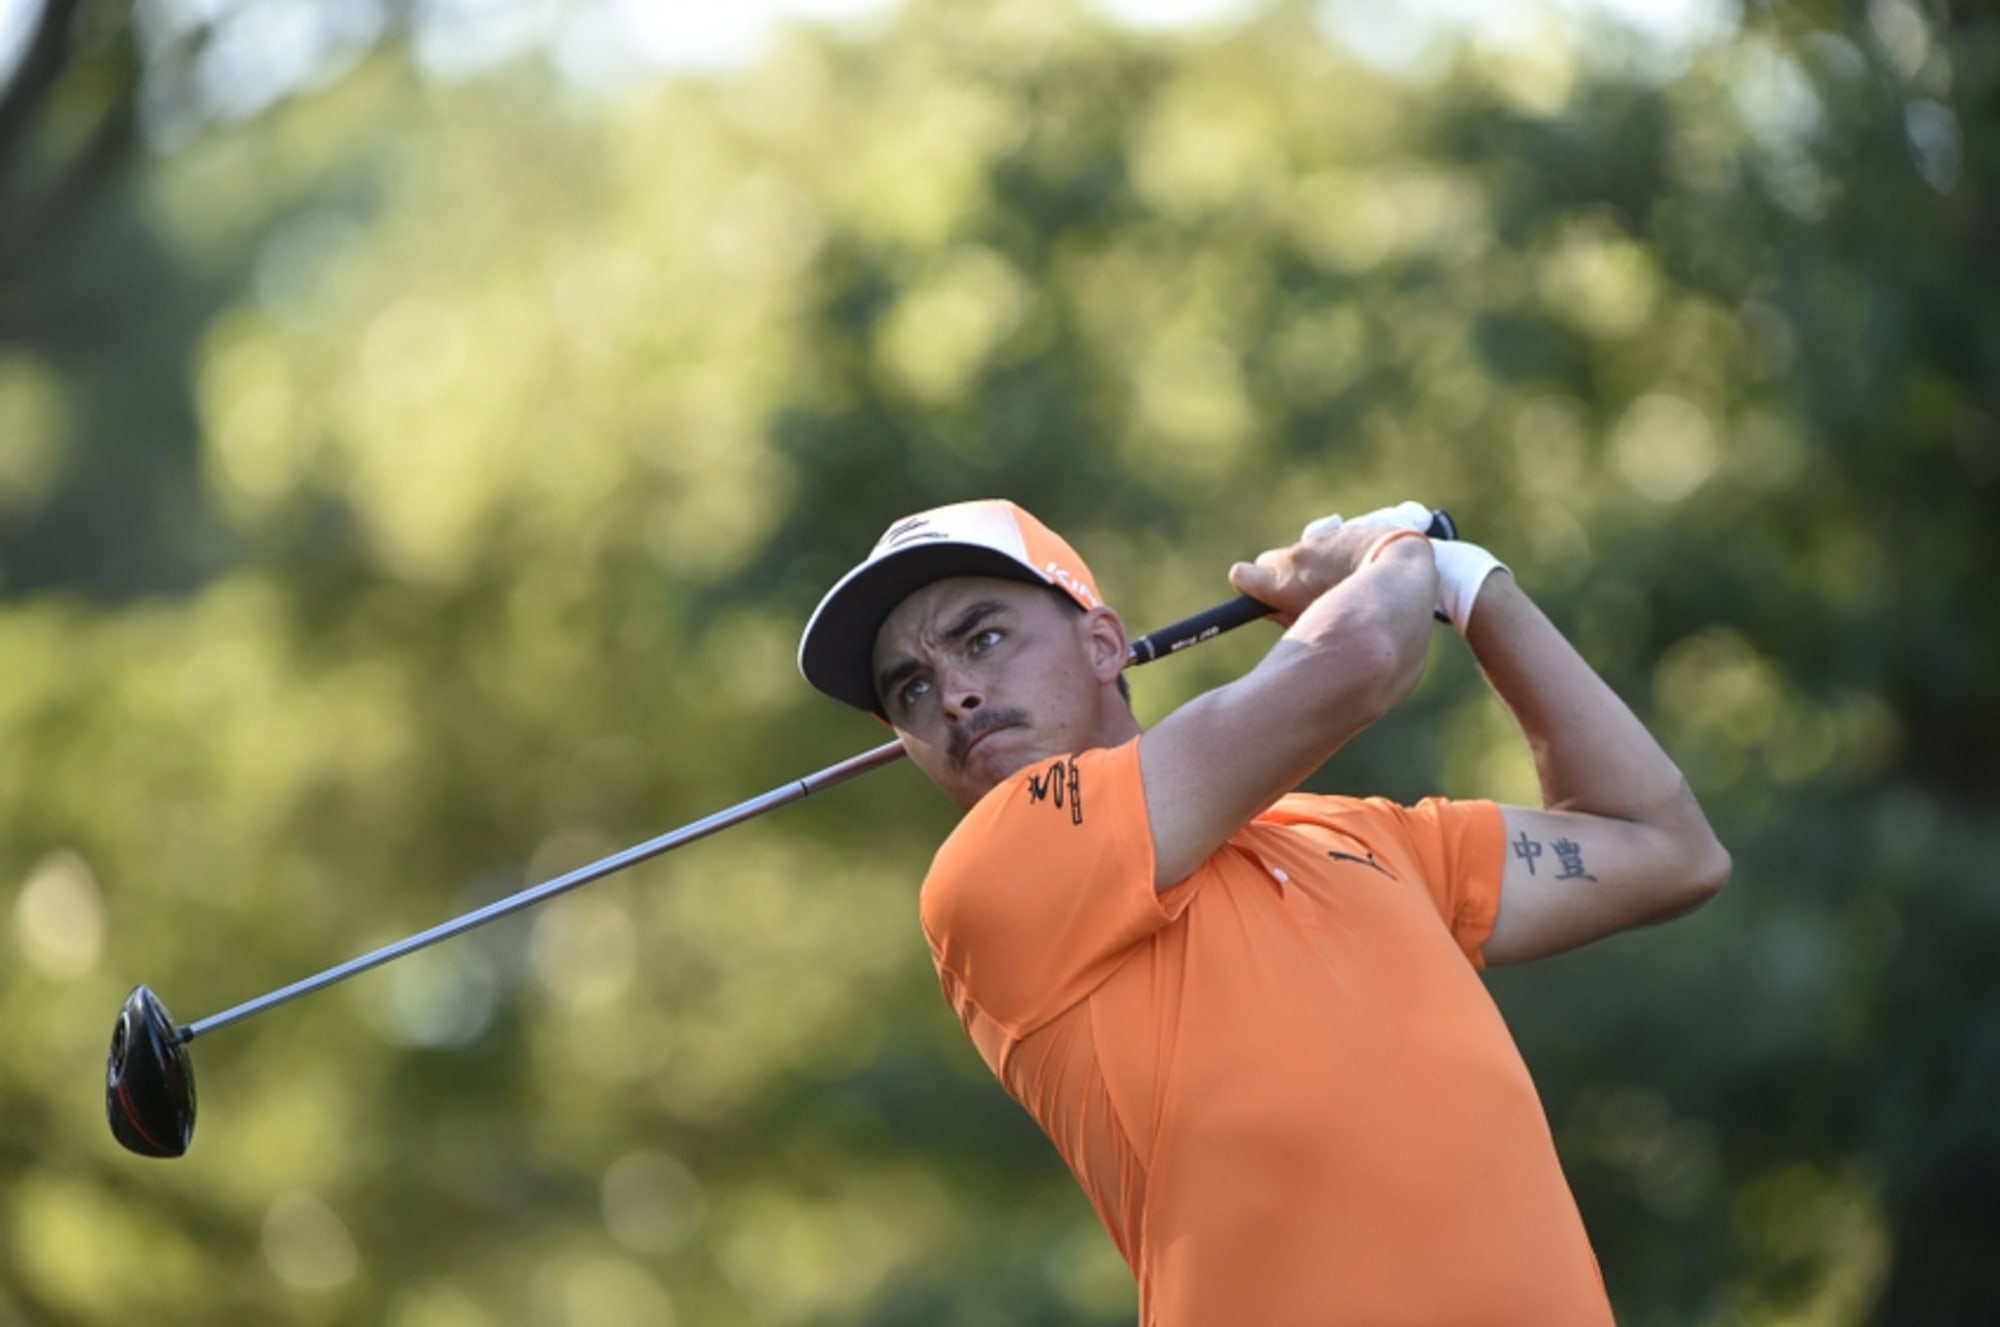 Rickie Fowler Can He Rally to Make Ryder Cup Squad?